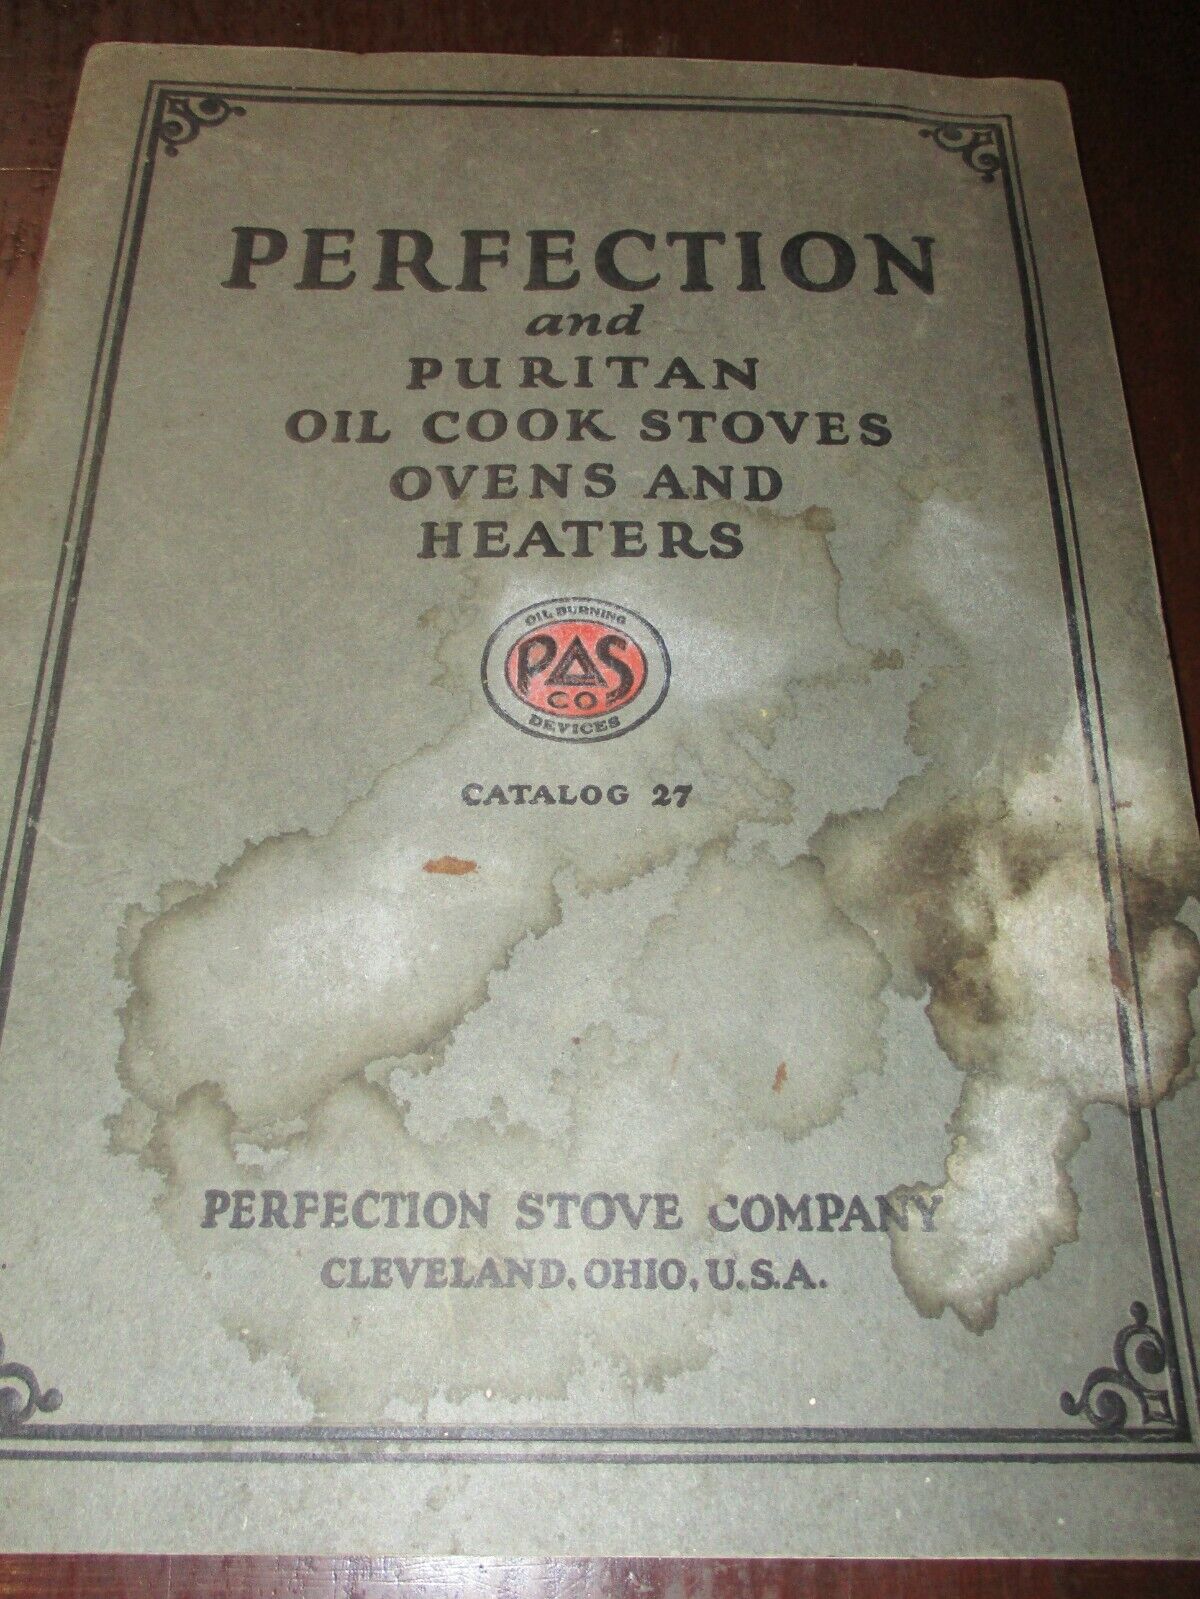 Perfection & Puritan Oil Cook Stoves, Ovens, And Heaters Catalog 27, From 1927